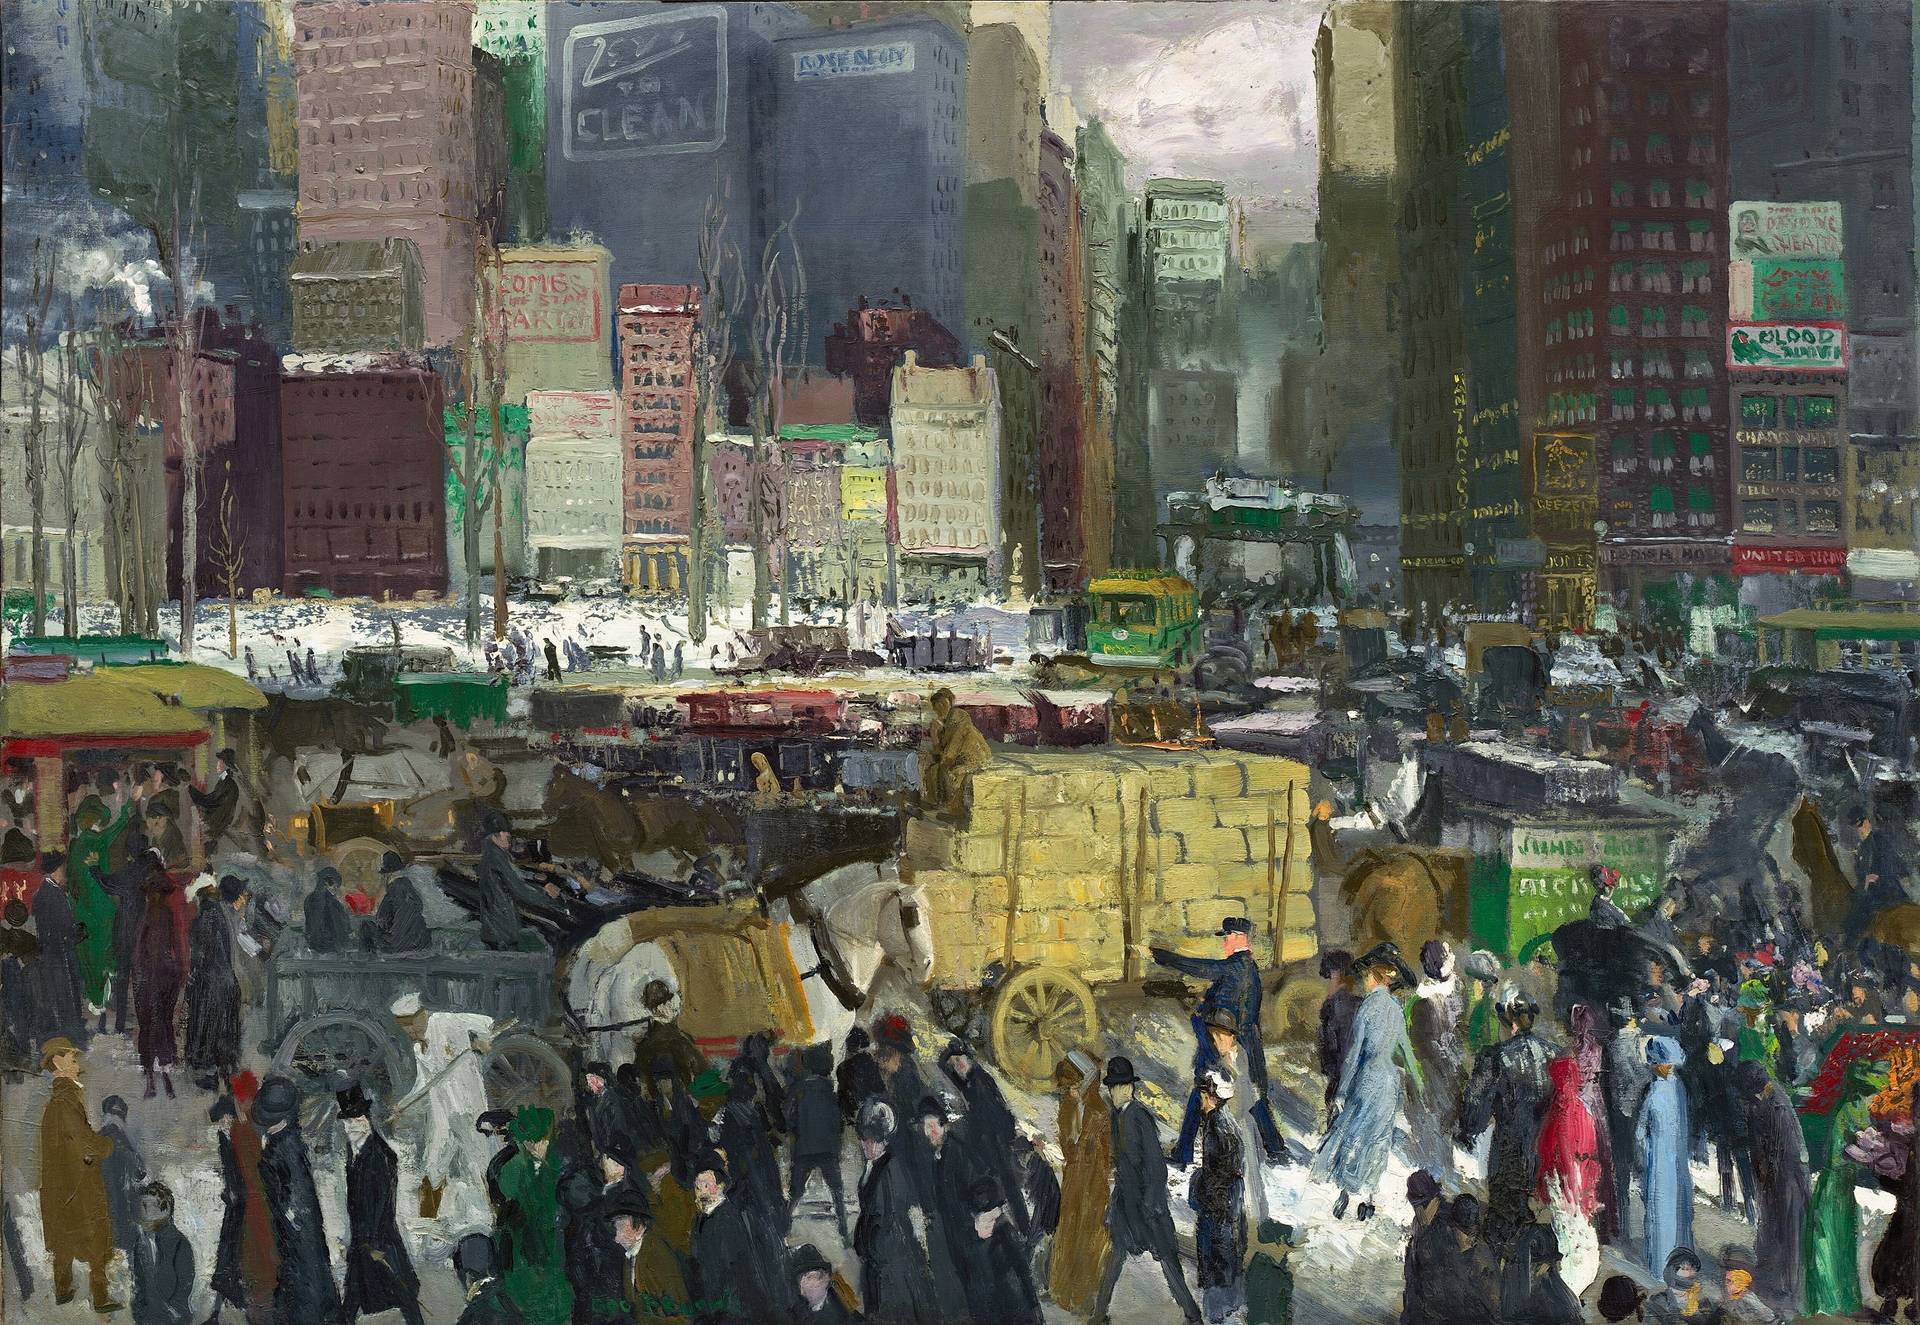 New York, by George Bellows (1911)